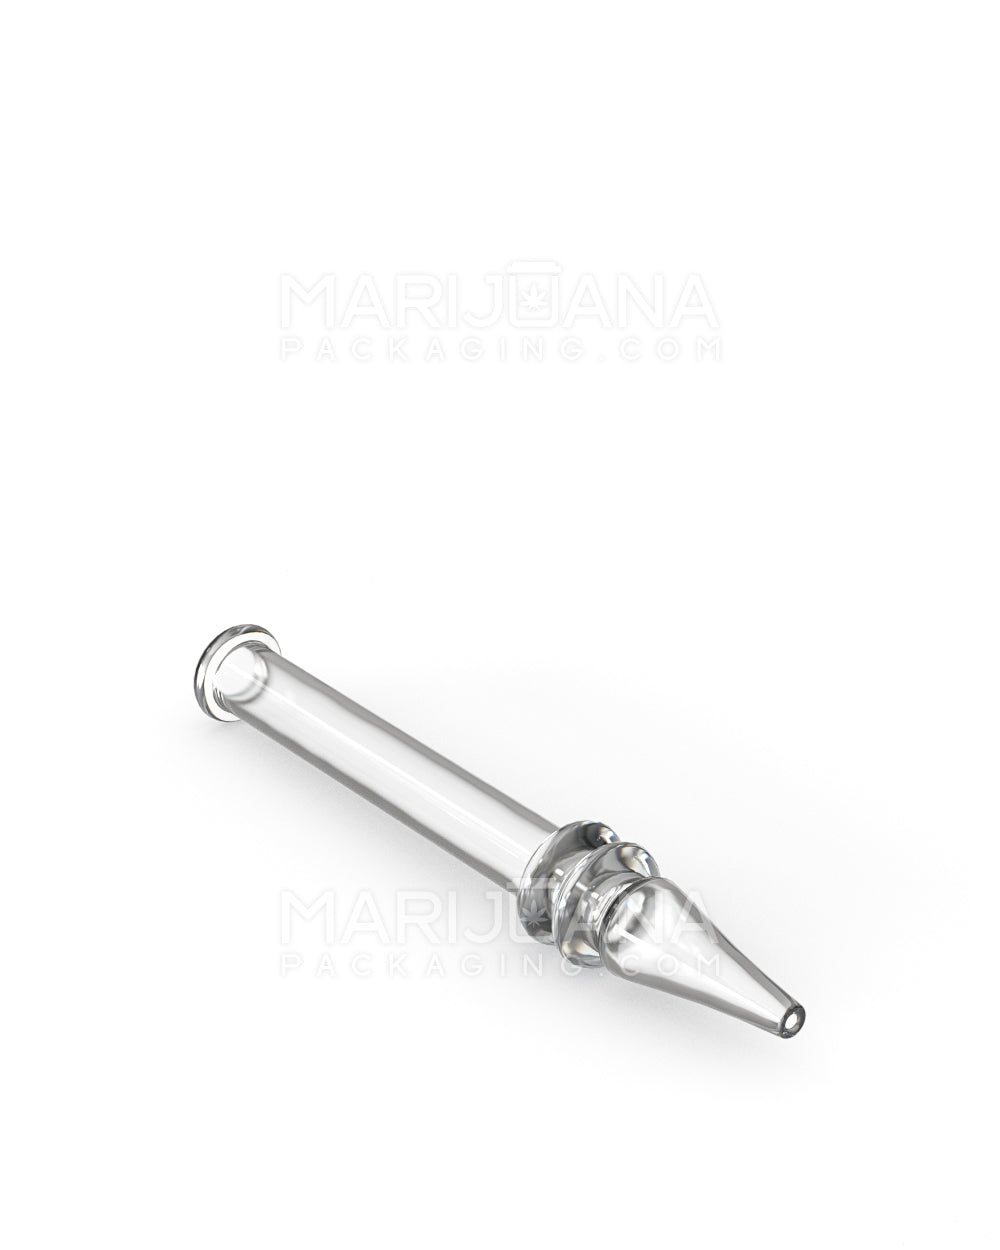 Full Quartz Nectar Collector Dab Pipe | 5in Long - 10mm Attachment - Clear - 3